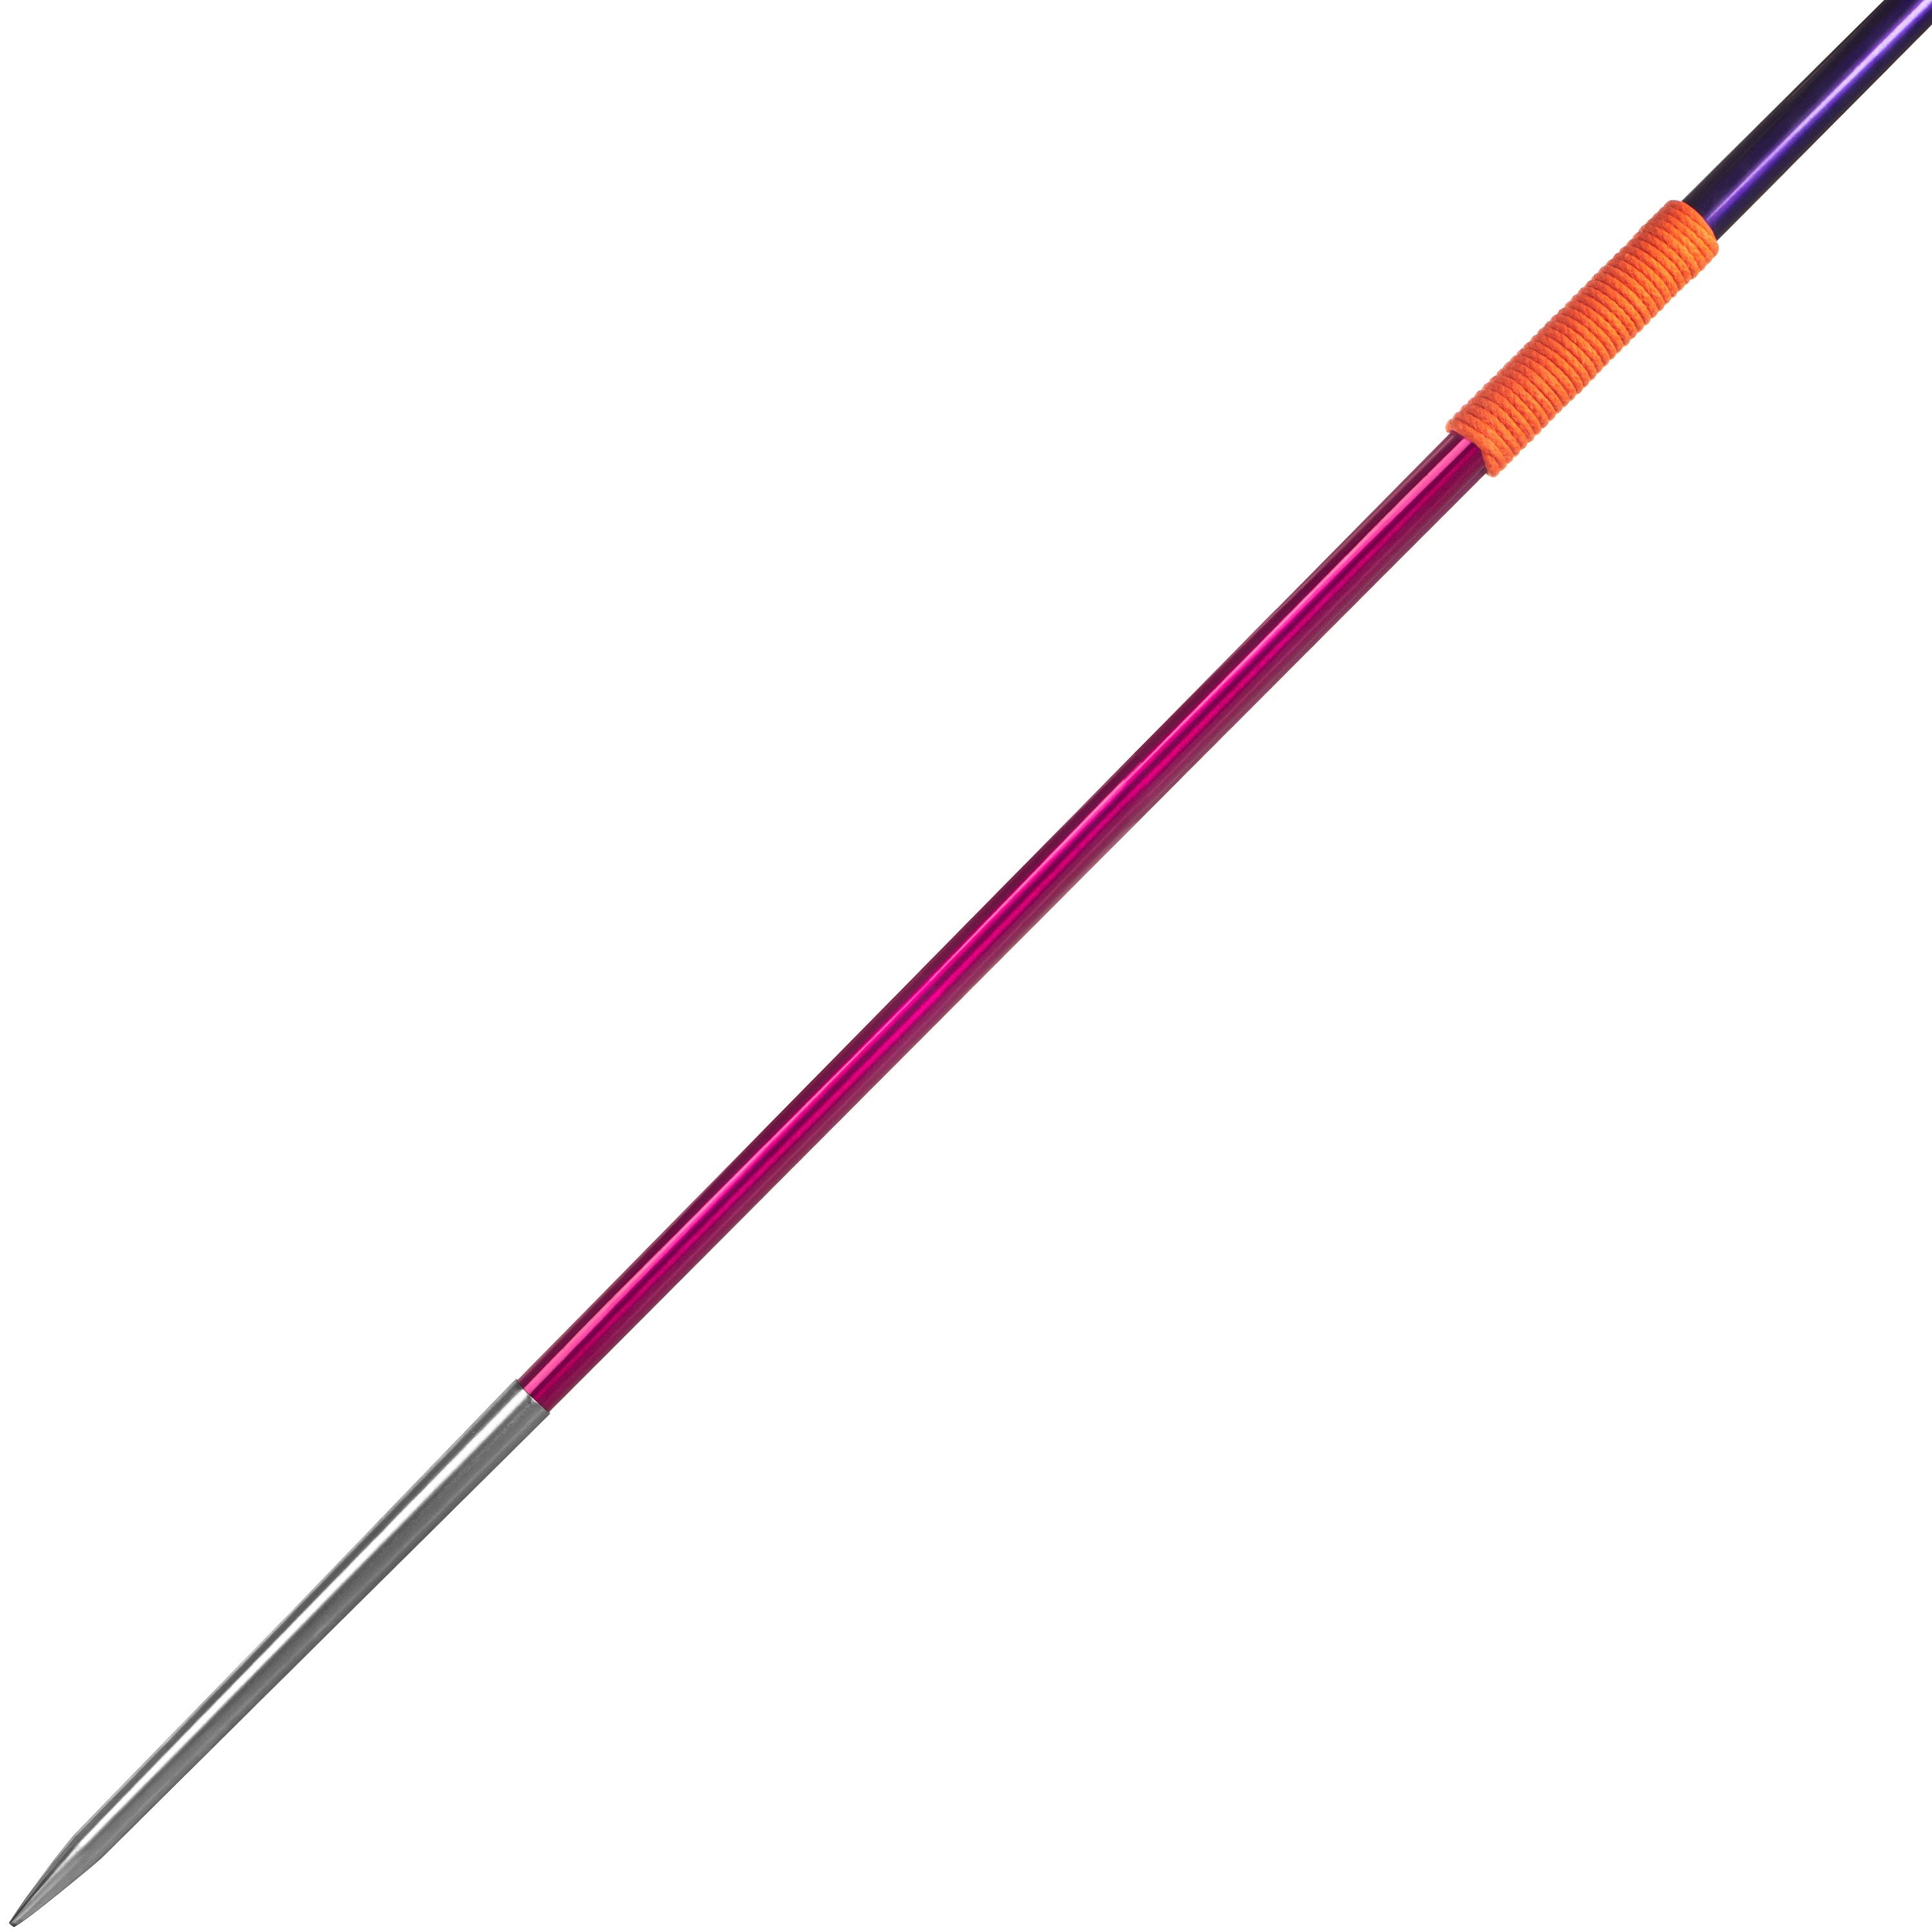 Polanik Air Flyer Competition Javelin